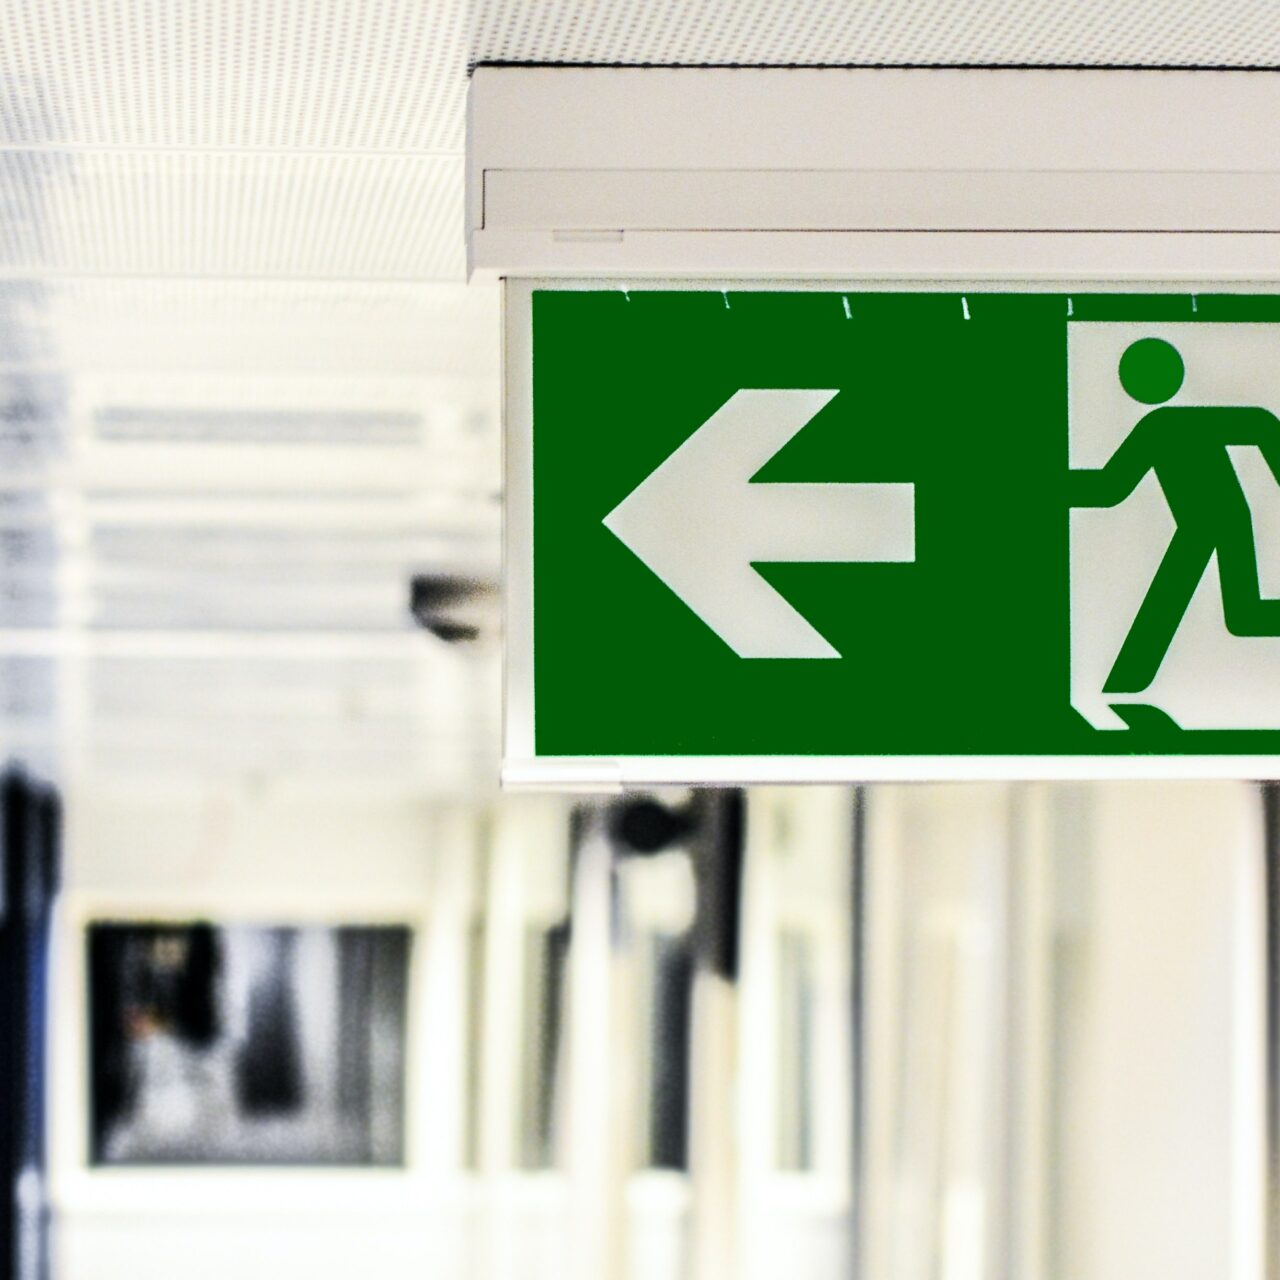 Emergency Lighting Conference highlights need for ‘safety, compliance & competence’ in the built environment